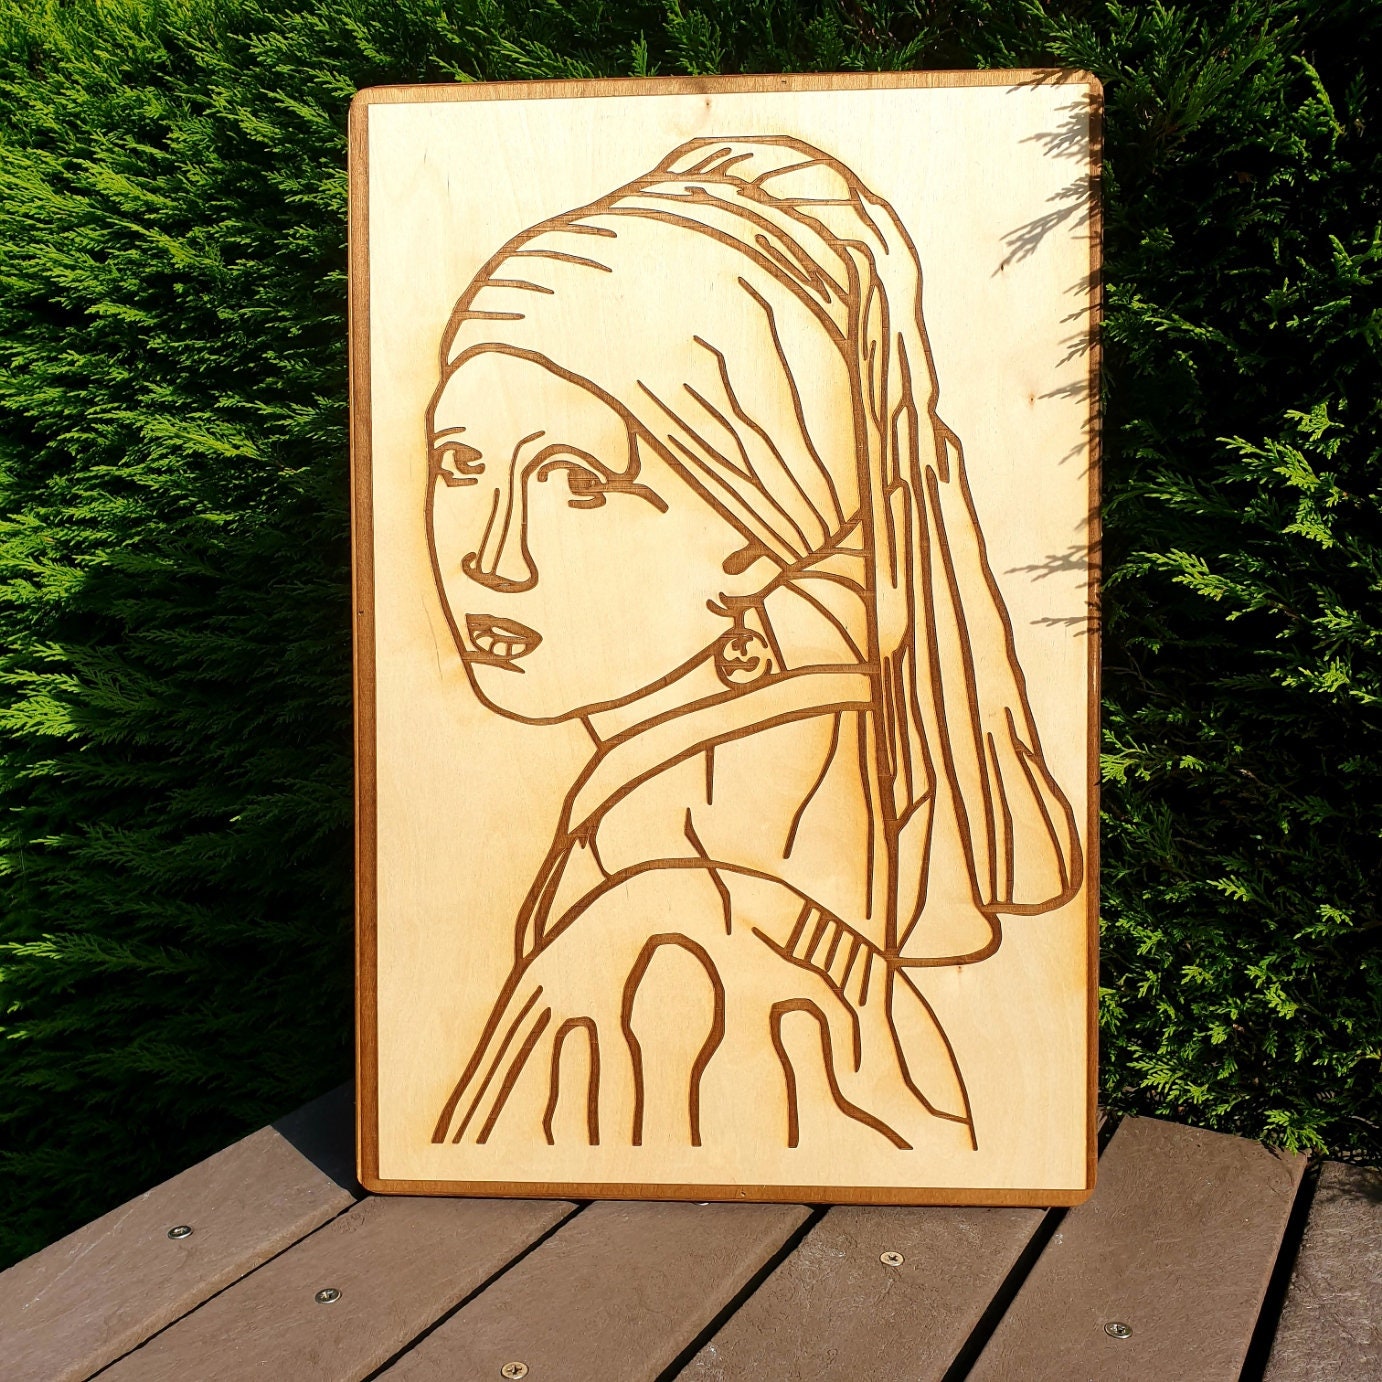 Lady with Pearl Earring Handmade Wood-Burning Craft